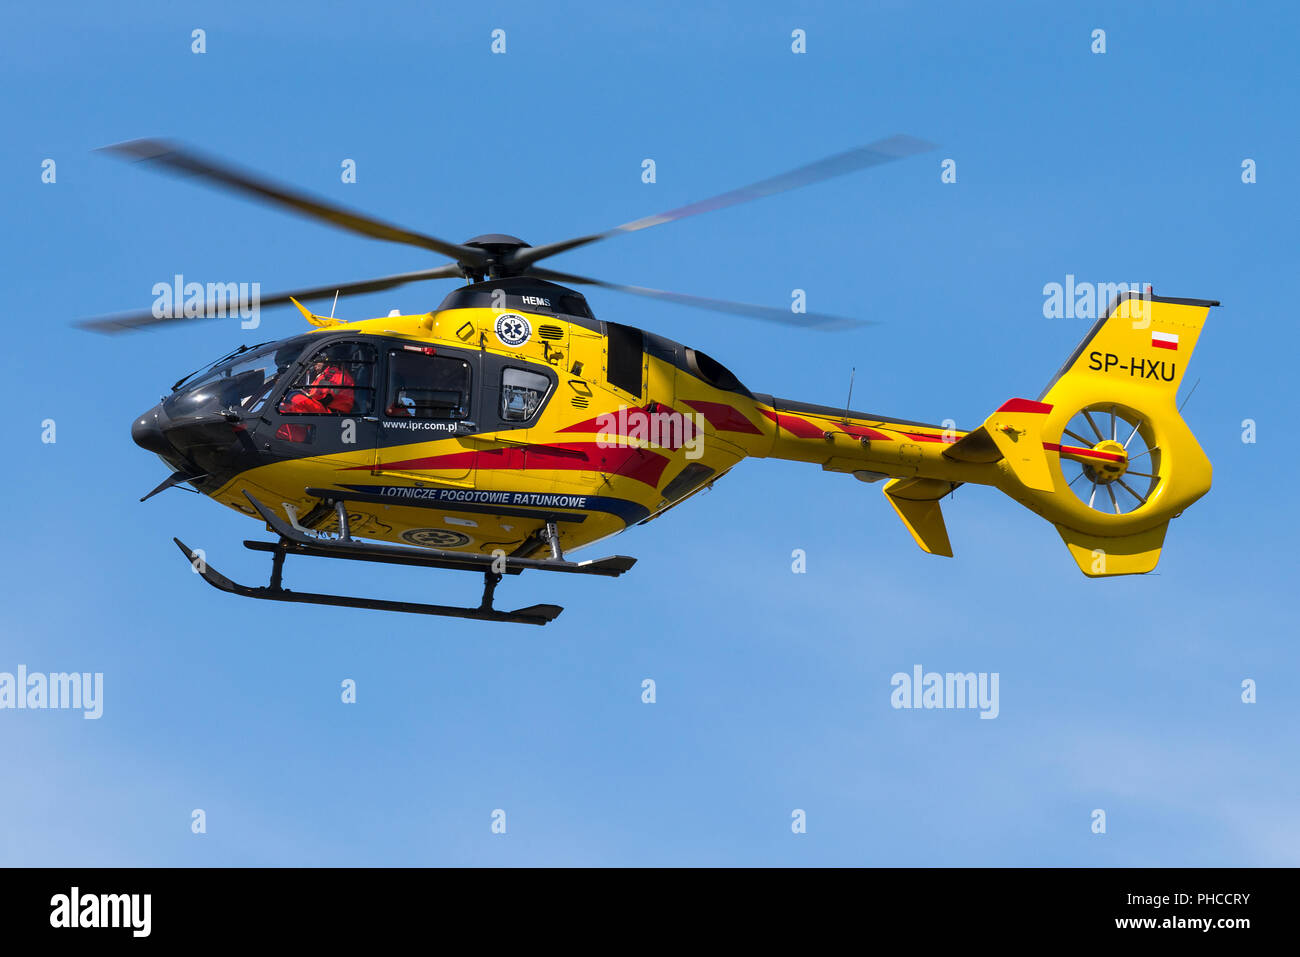 A Eurocopter EC135 helicopter of the Polish Medical Air Rescue. Stock Photo